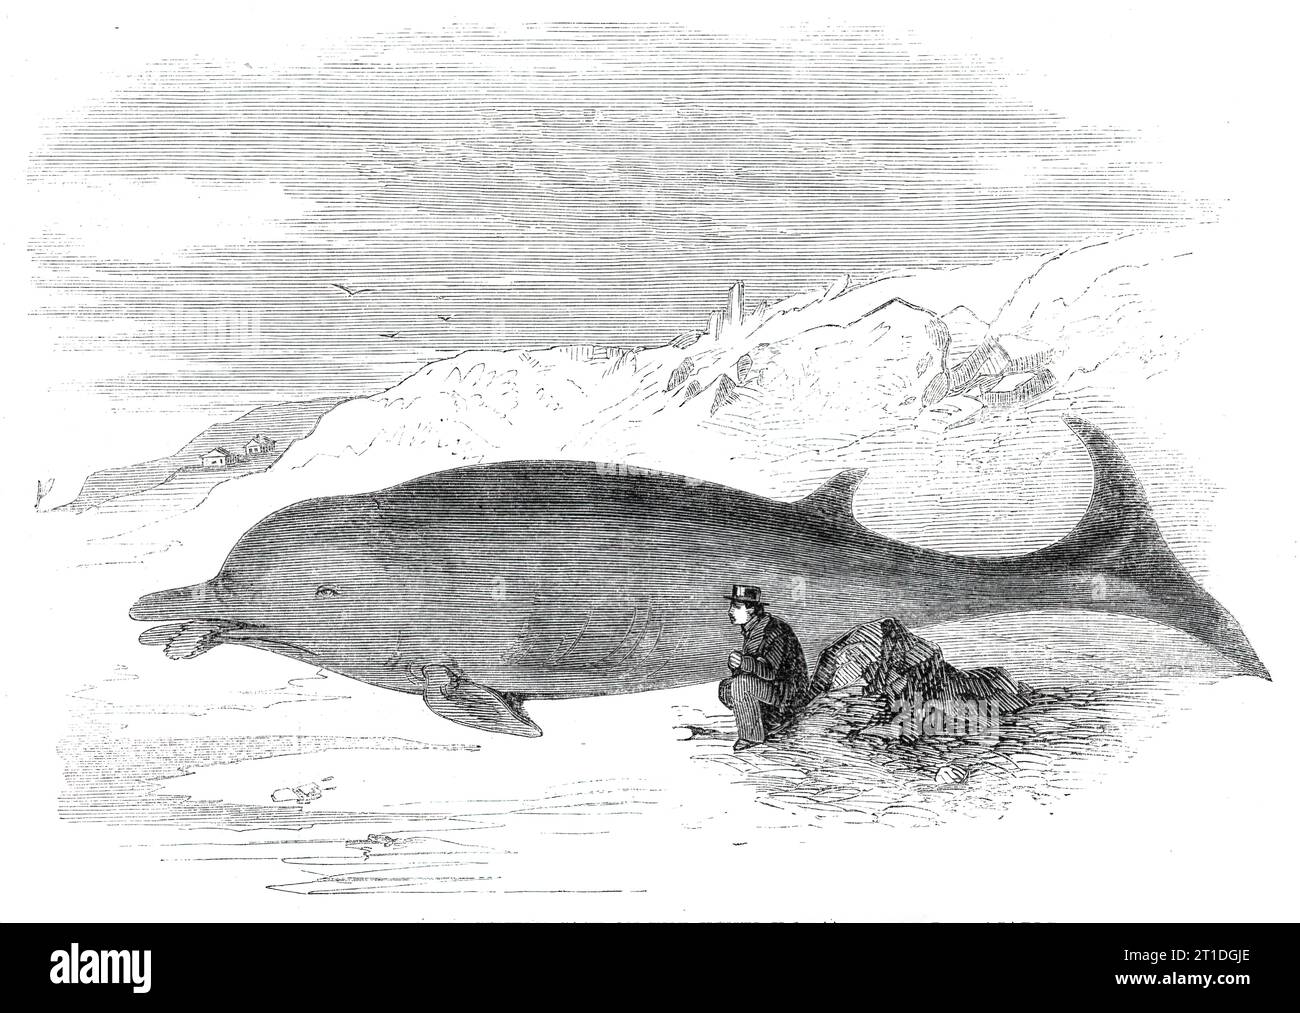 Cetacean animal recently cast on the Kentish coast, near Whitstable, 1860. From &quot;Illustrated London News&quot;, 1860. 'It may be of interest to those of our readers who are naturalists, as the animal does not seem to belong exactly to any of the described genera...Its extreme length is 26 feet... The 'blowhole,' as shown in the Engraving, is set transversely on the crown of the head, in a single straight line, about 6 inches long, and slightly behind the eyes. The eyes are of the human shape, about twice as large, and with eyelids...The tongue is entirely detached beneath, and is fringed Stock Photo